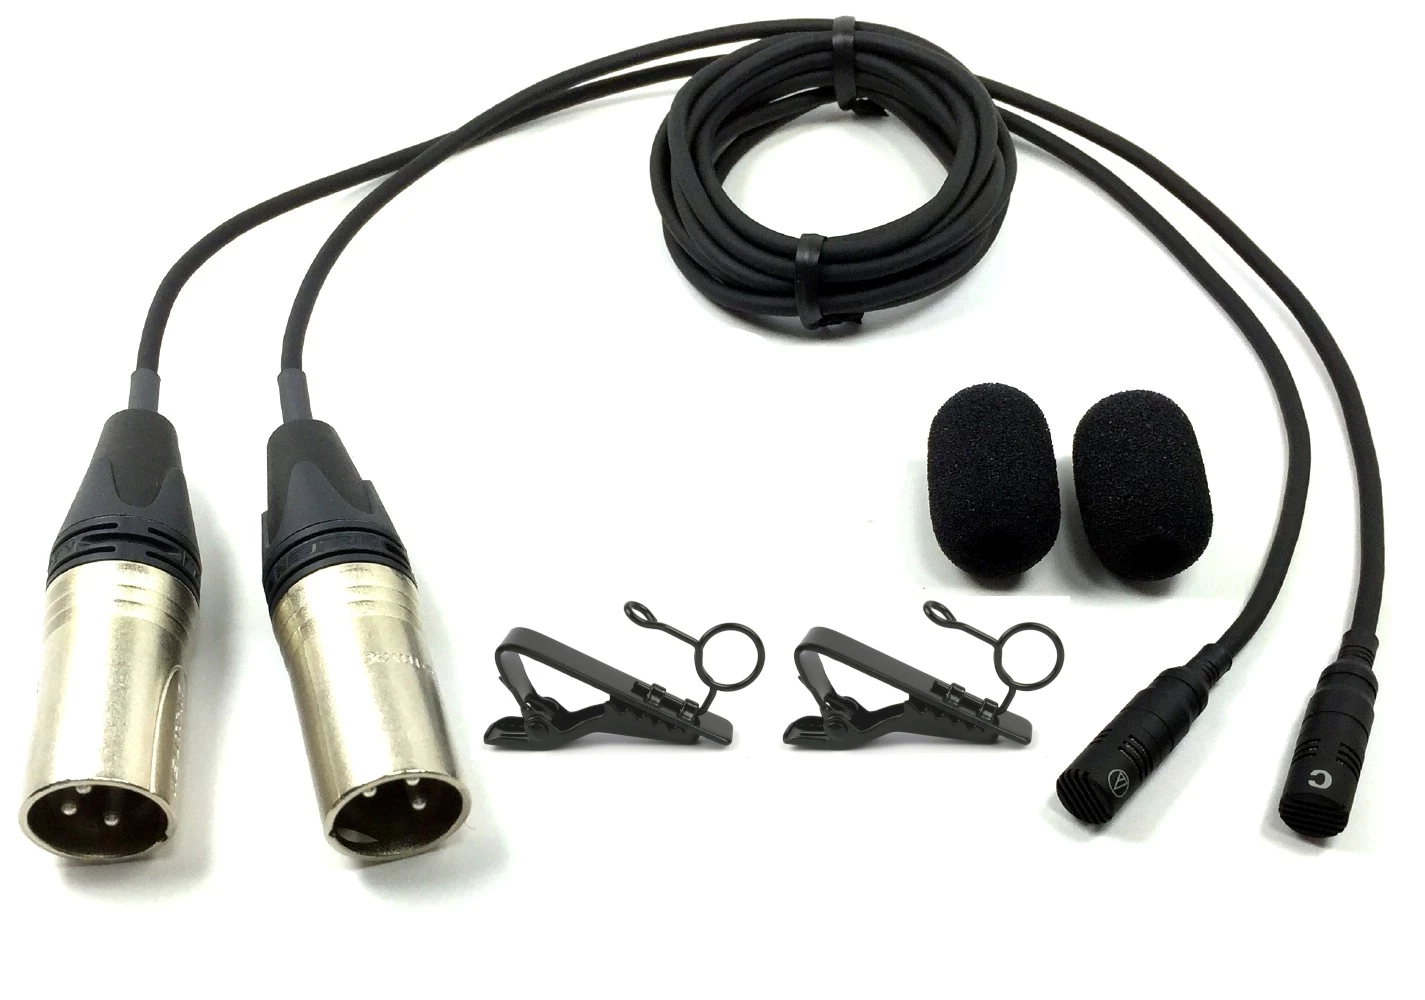 Sound Professionals/Audio Technica SP-CMC-8 - Miniature Cardioid stereo  microphones with removable clips and windscreens SP-CMC-8